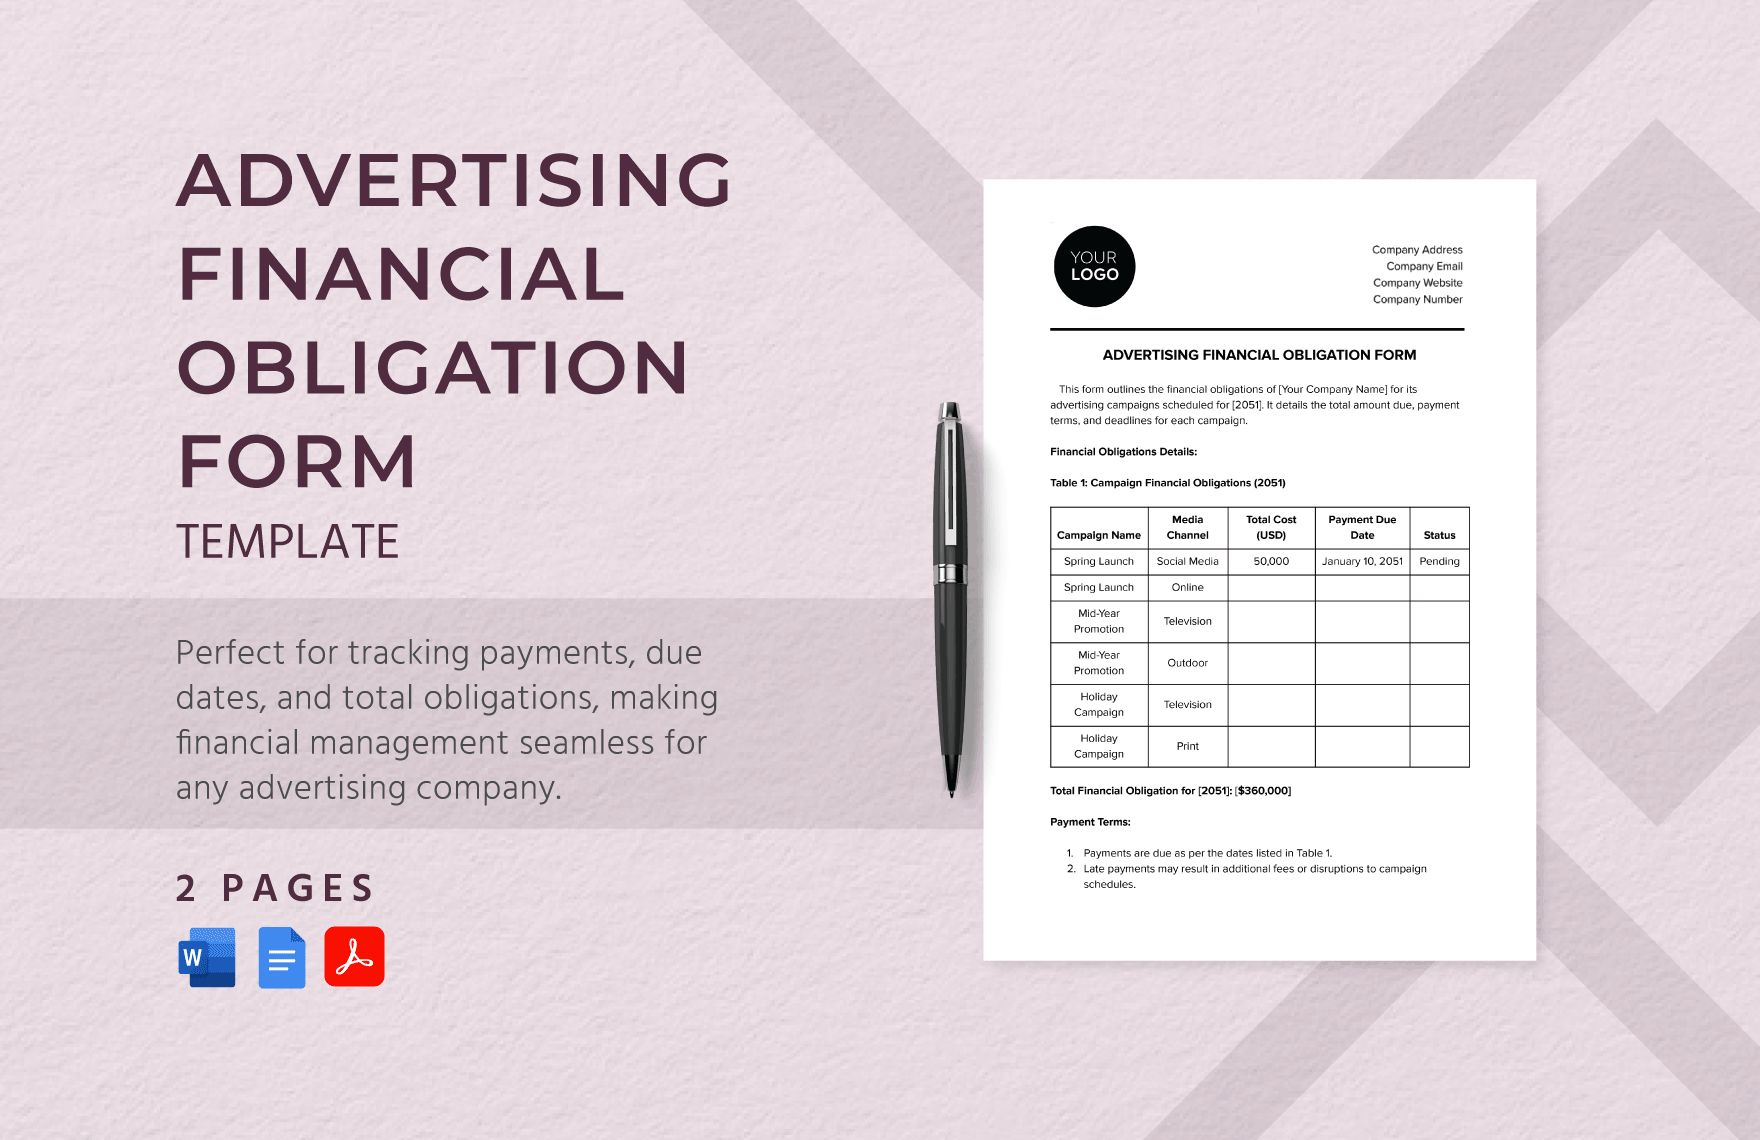 Advertising Financial Obligation Form Template in Word, Google Docs, PDF